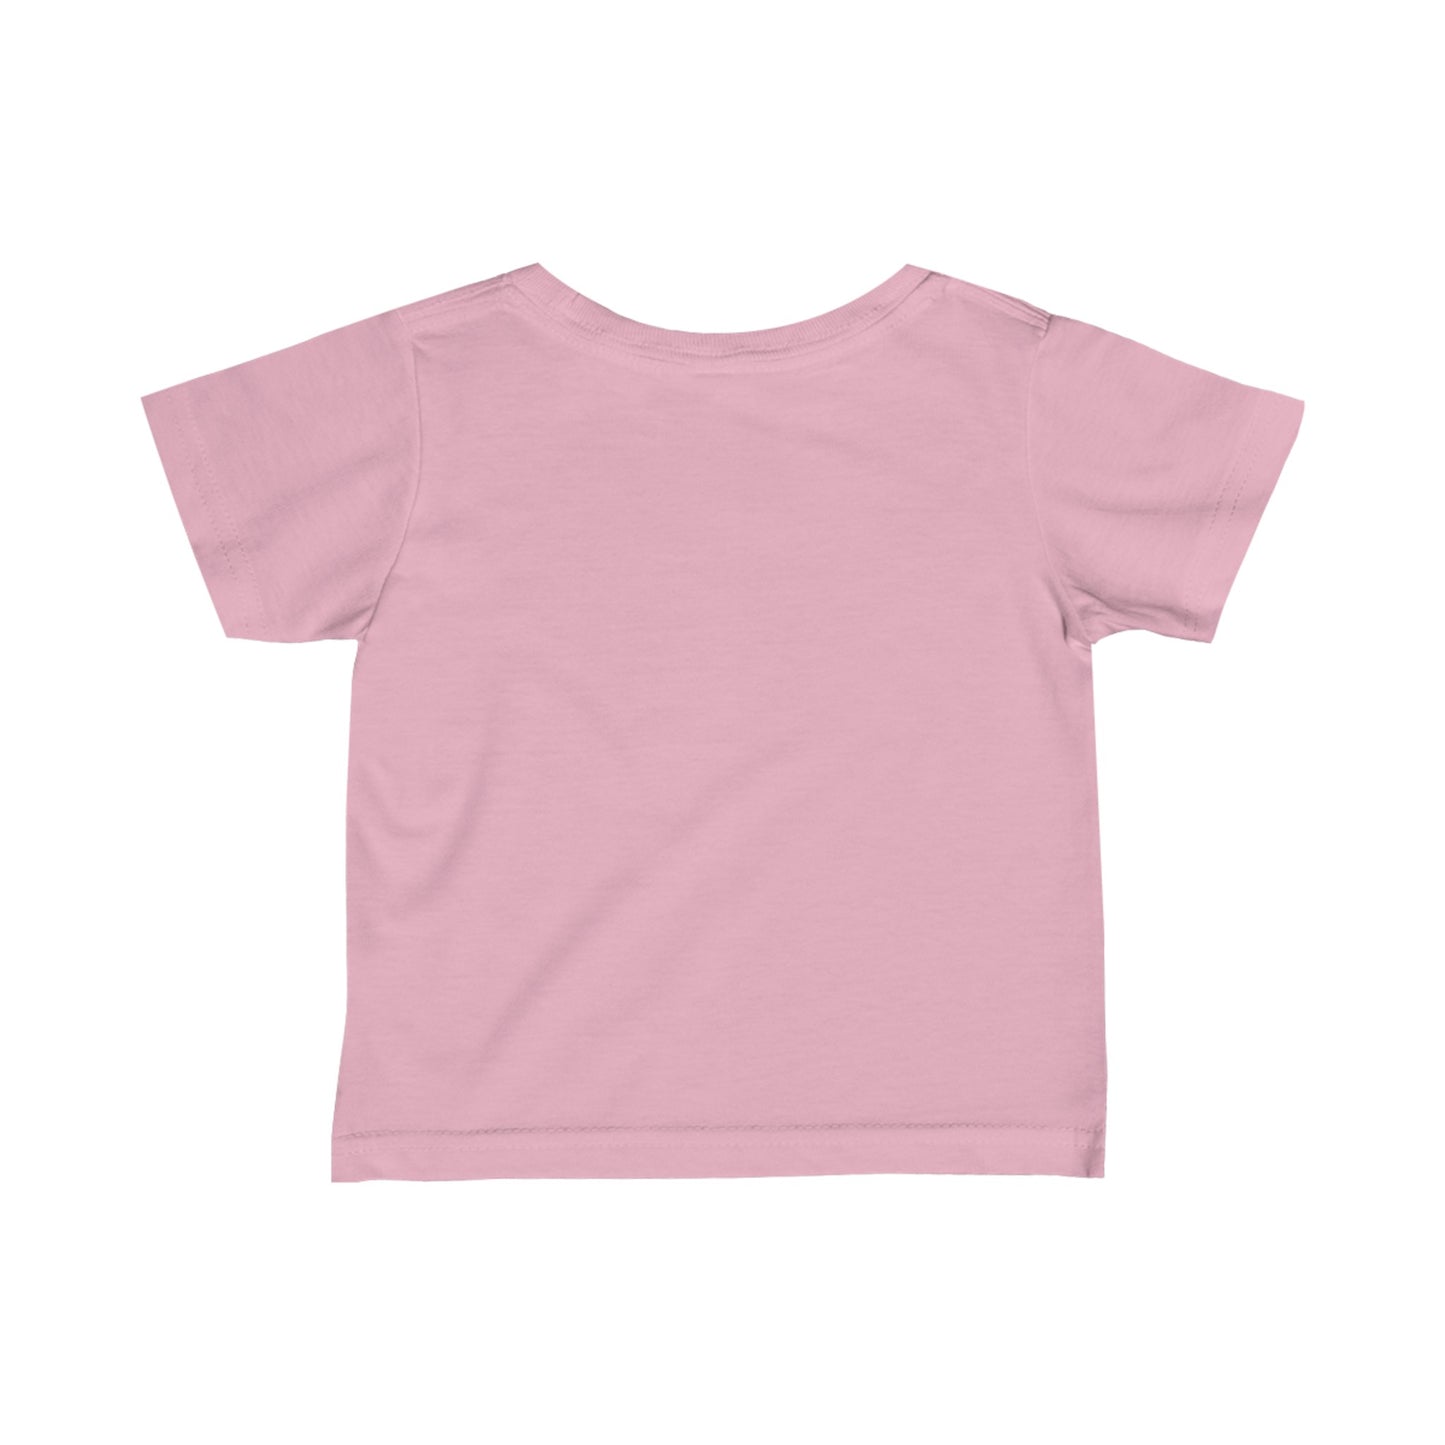 Hungry Face Baby/Toddler Tee